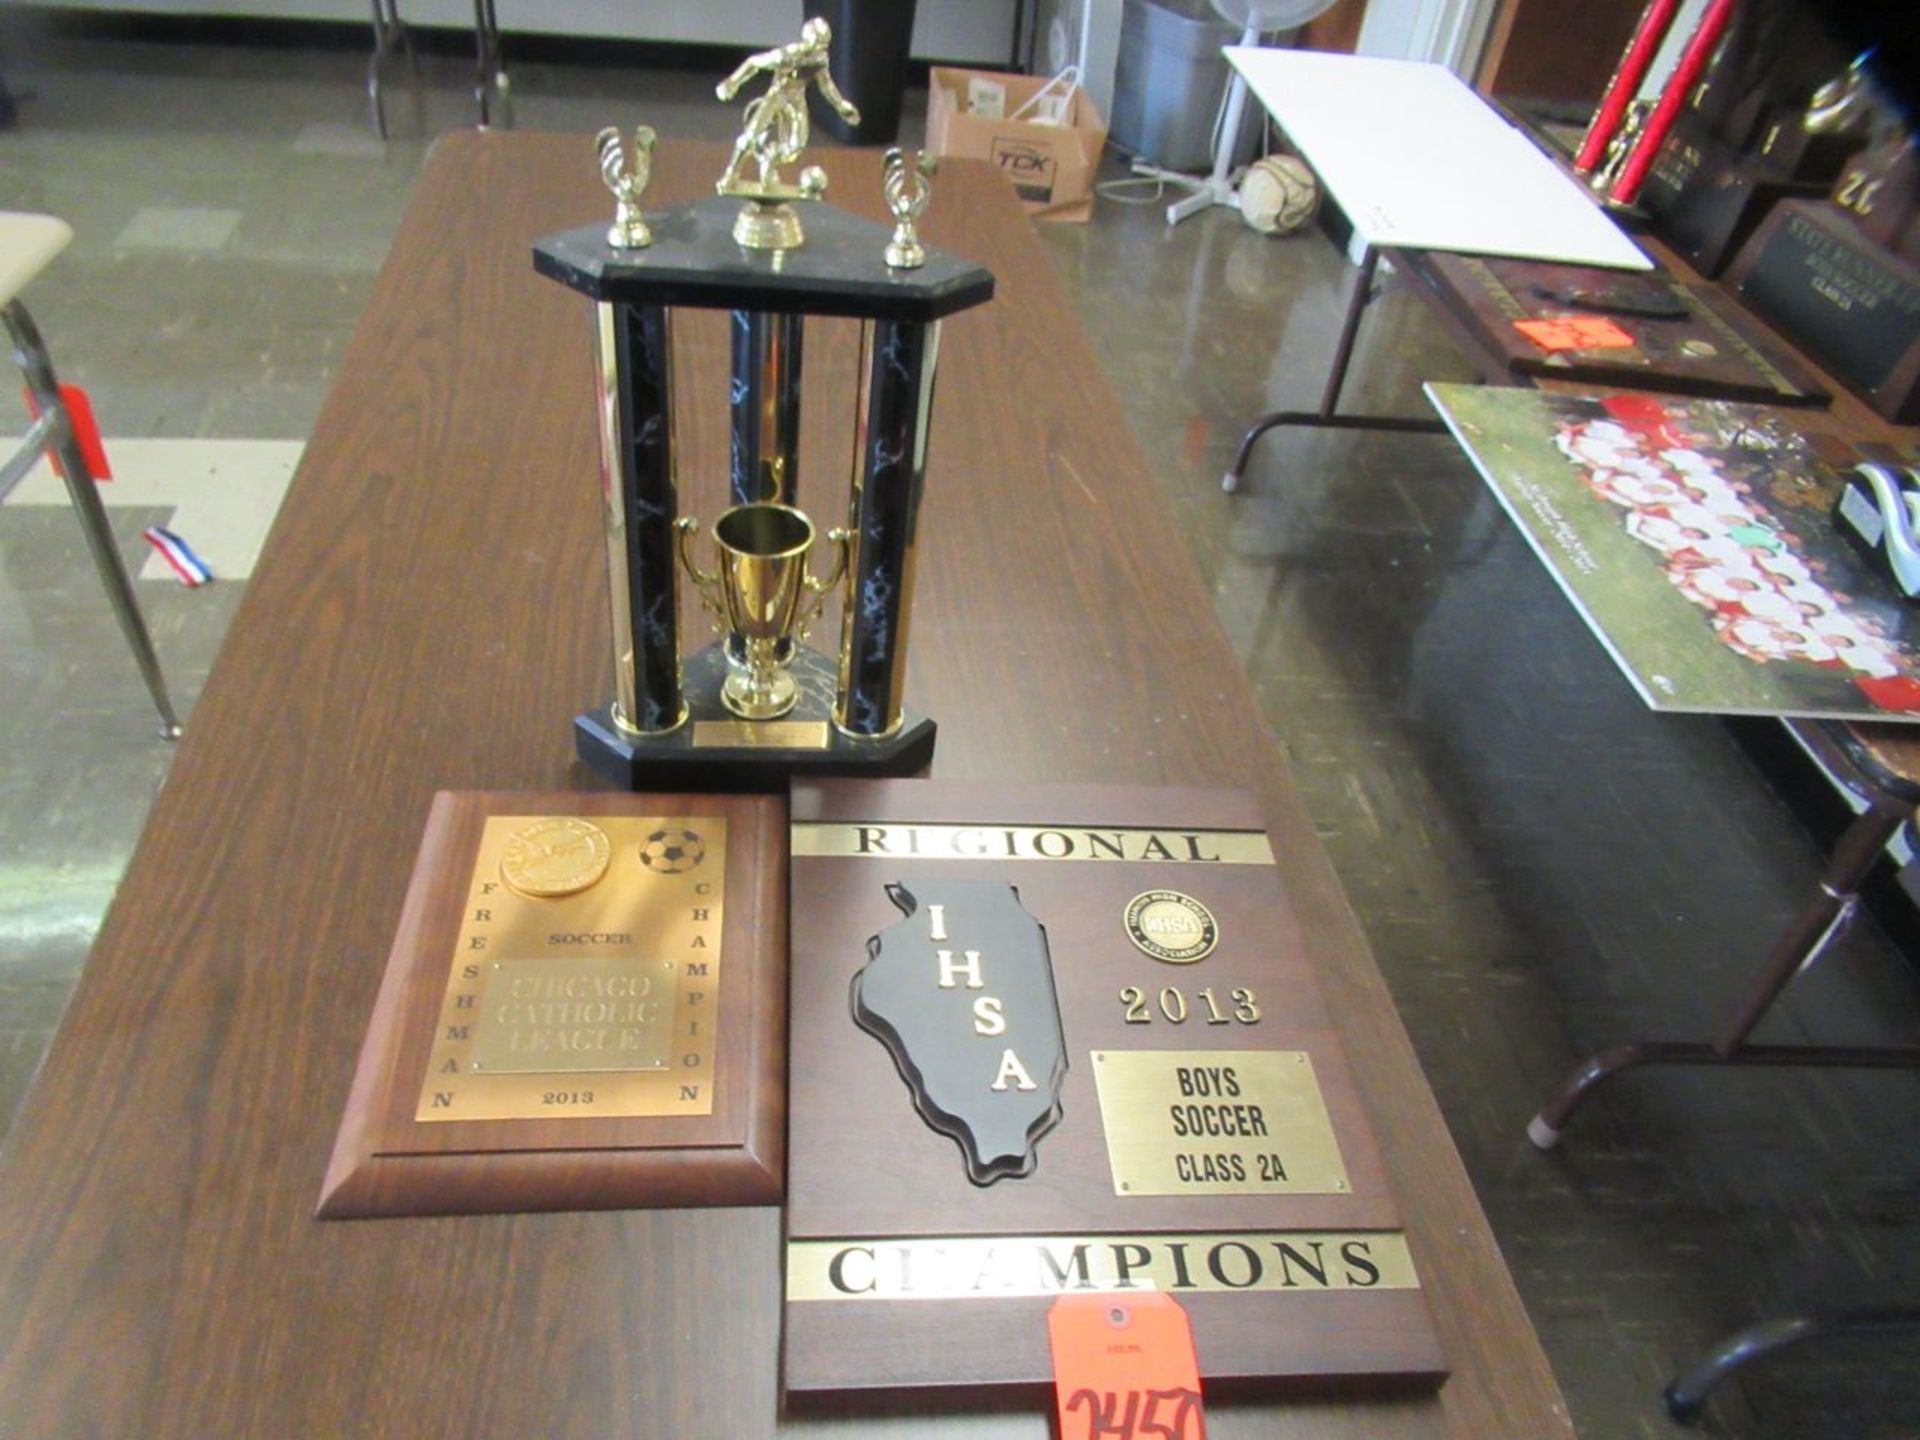 2013 IHSA State Class 2A Regional Champions Plaque, 2013 CCAL Freshman Champions Trophy, 2012-2013